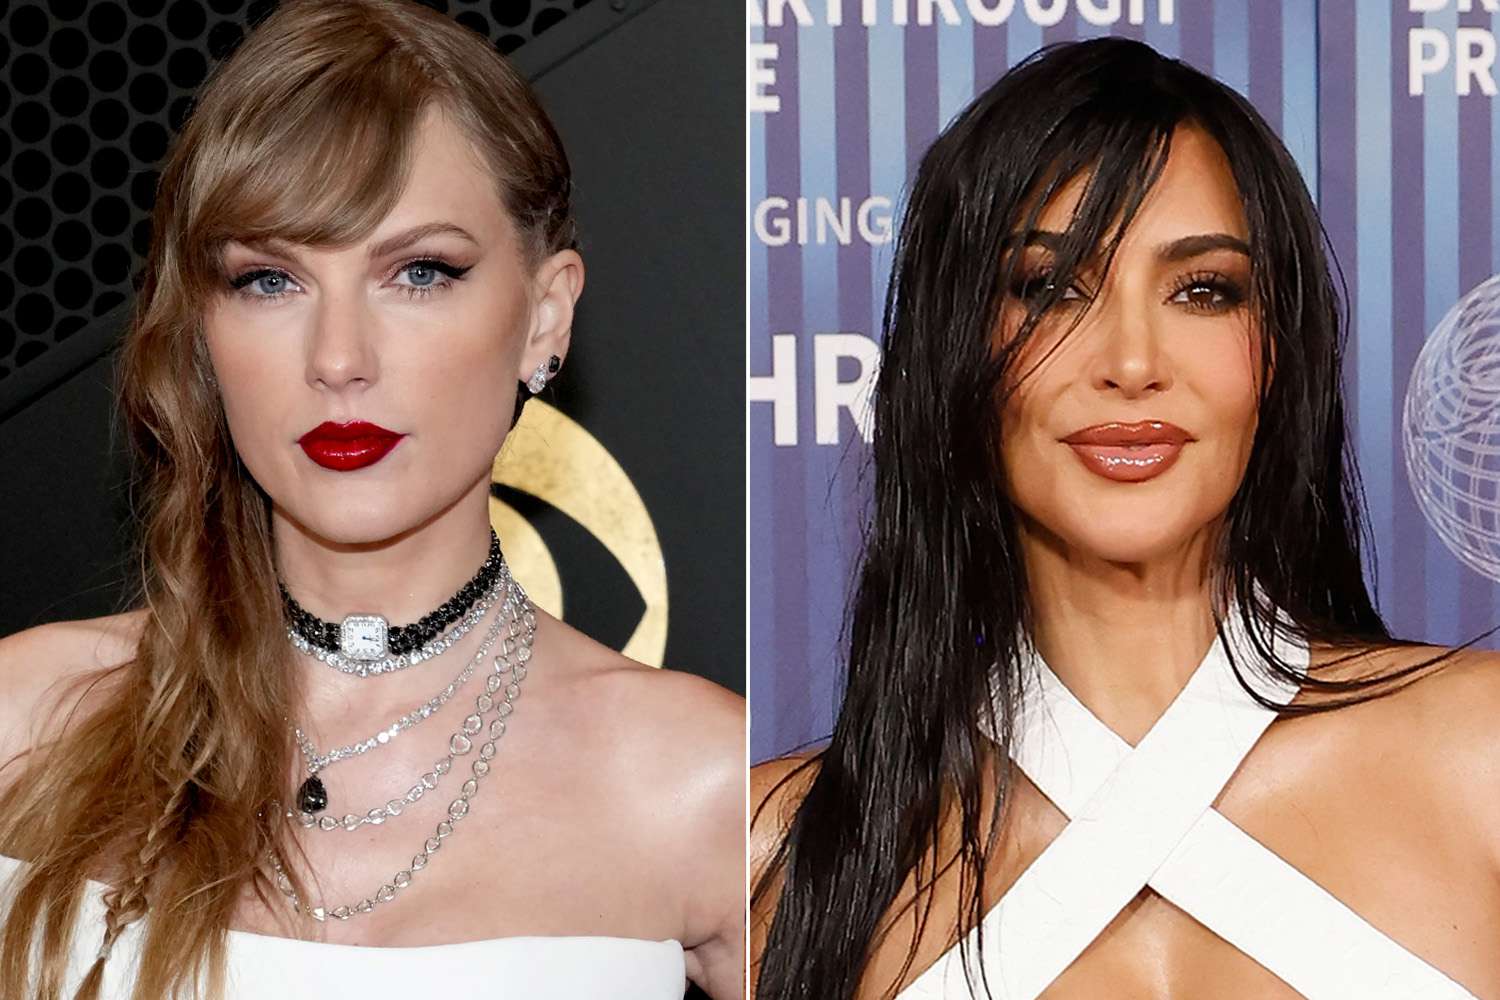 Taylor Swift Seemingly Disses Kim Kardashian in Scathing ‘TTPD’ Song About High School Bully